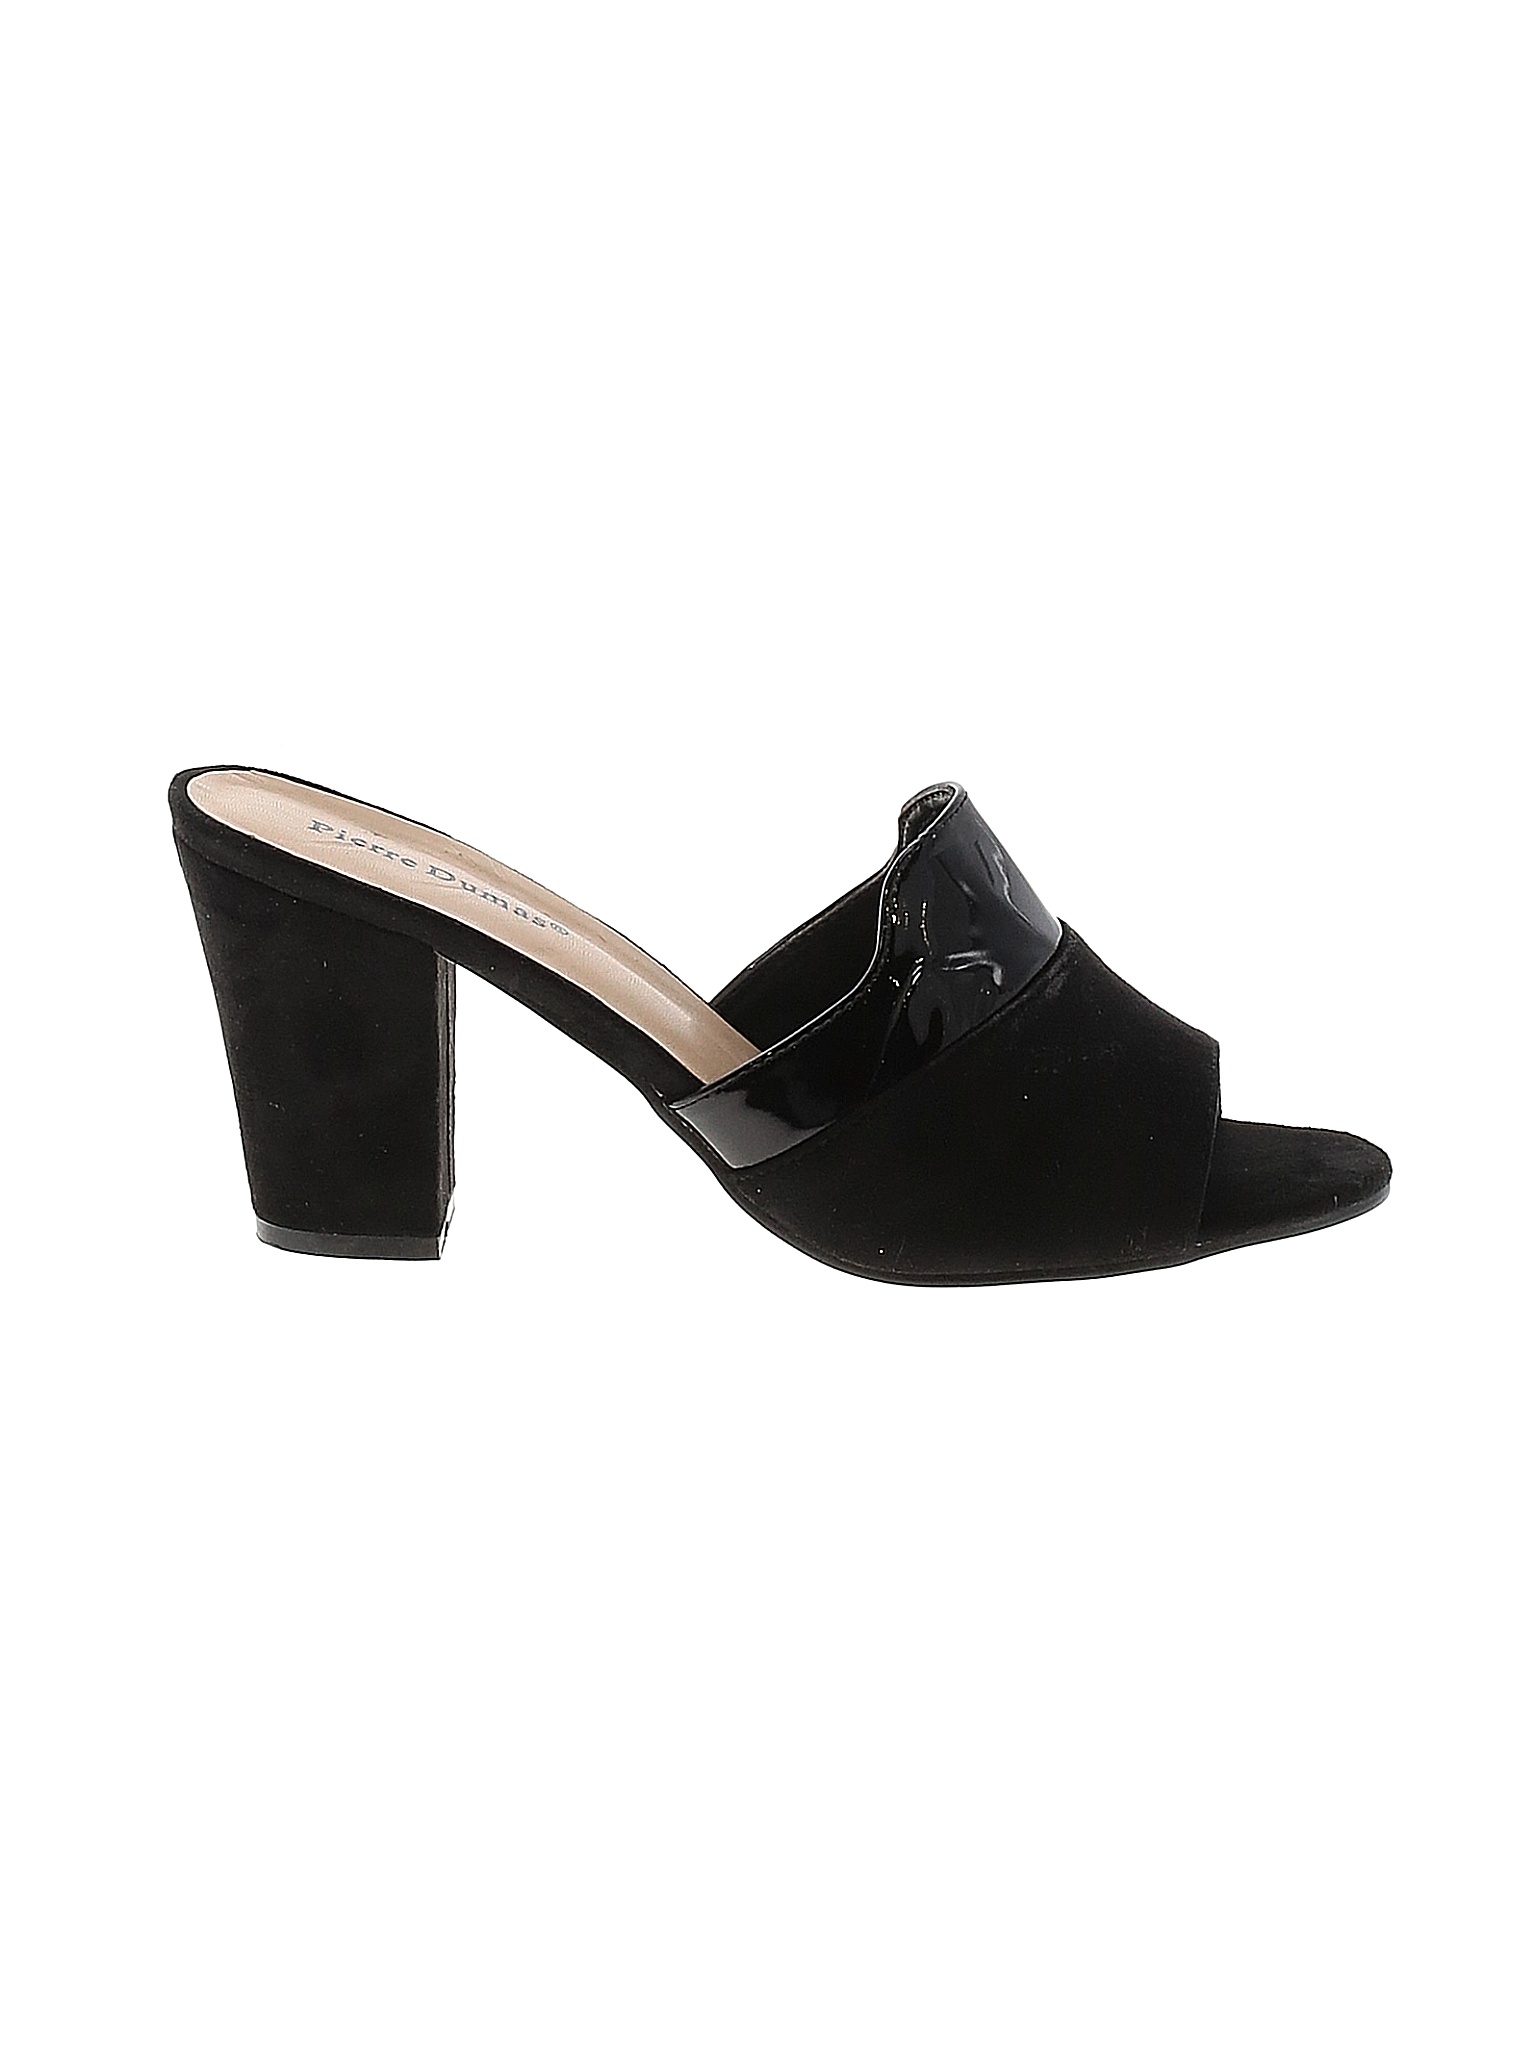 Pierre Dumas Women's Shoes On Sale Up To 90% Off Retail | thredUP